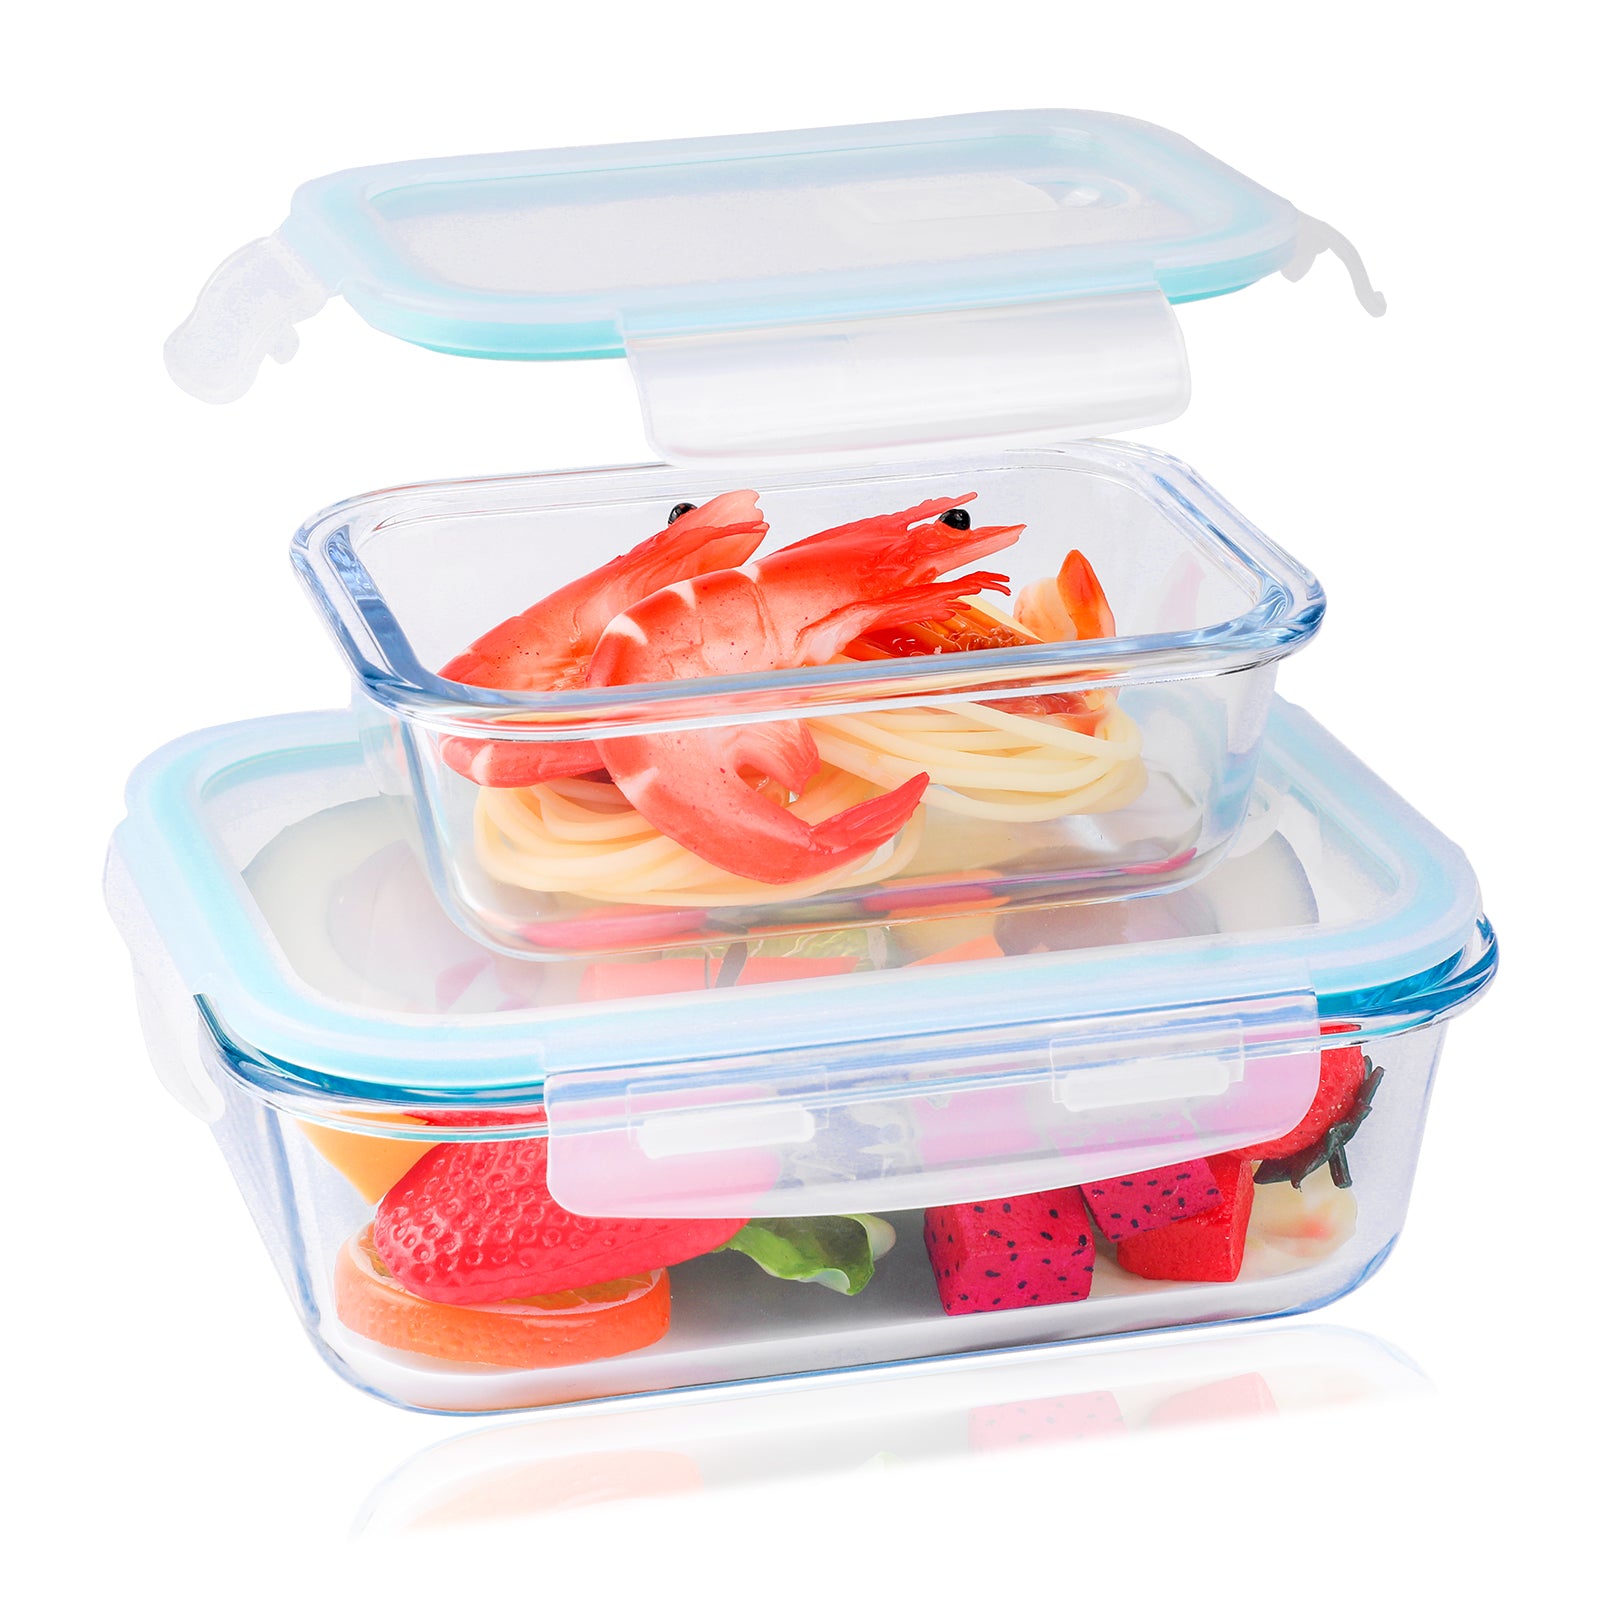 410 ml + 1040 ml Glass Meal Prep Containers Reusable wholesale online cheap,Food  Containers with Lids Airtight,Glass Lunch Containers for Office  Workers,Glass Food Storage –